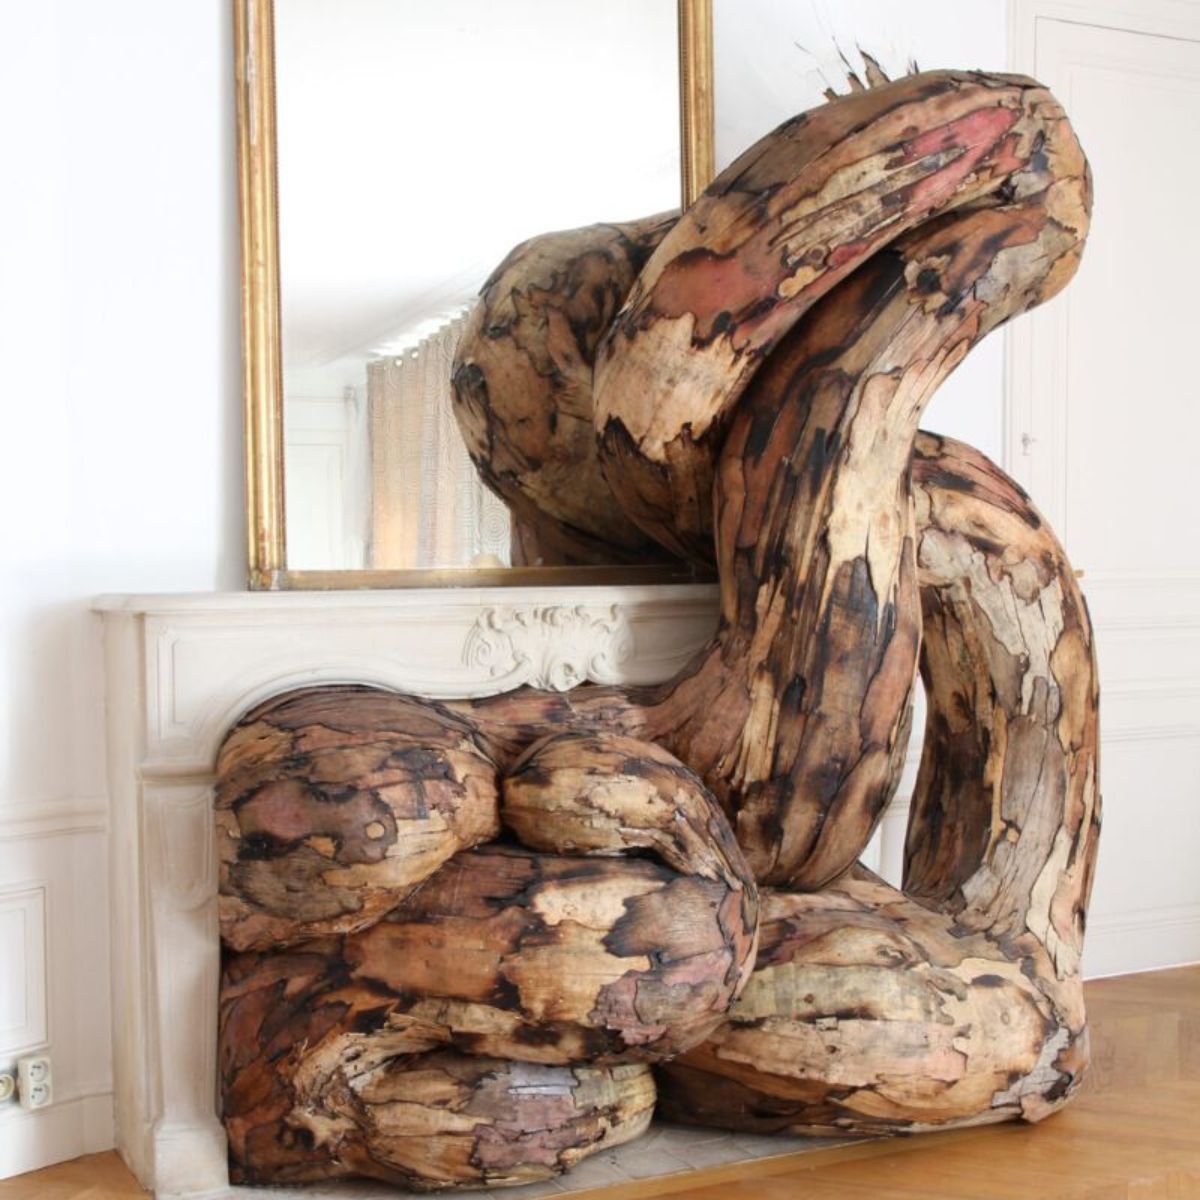 henrique-oliveira-and-his-monumental-collection-of-eerie-wood-sculptures-featured